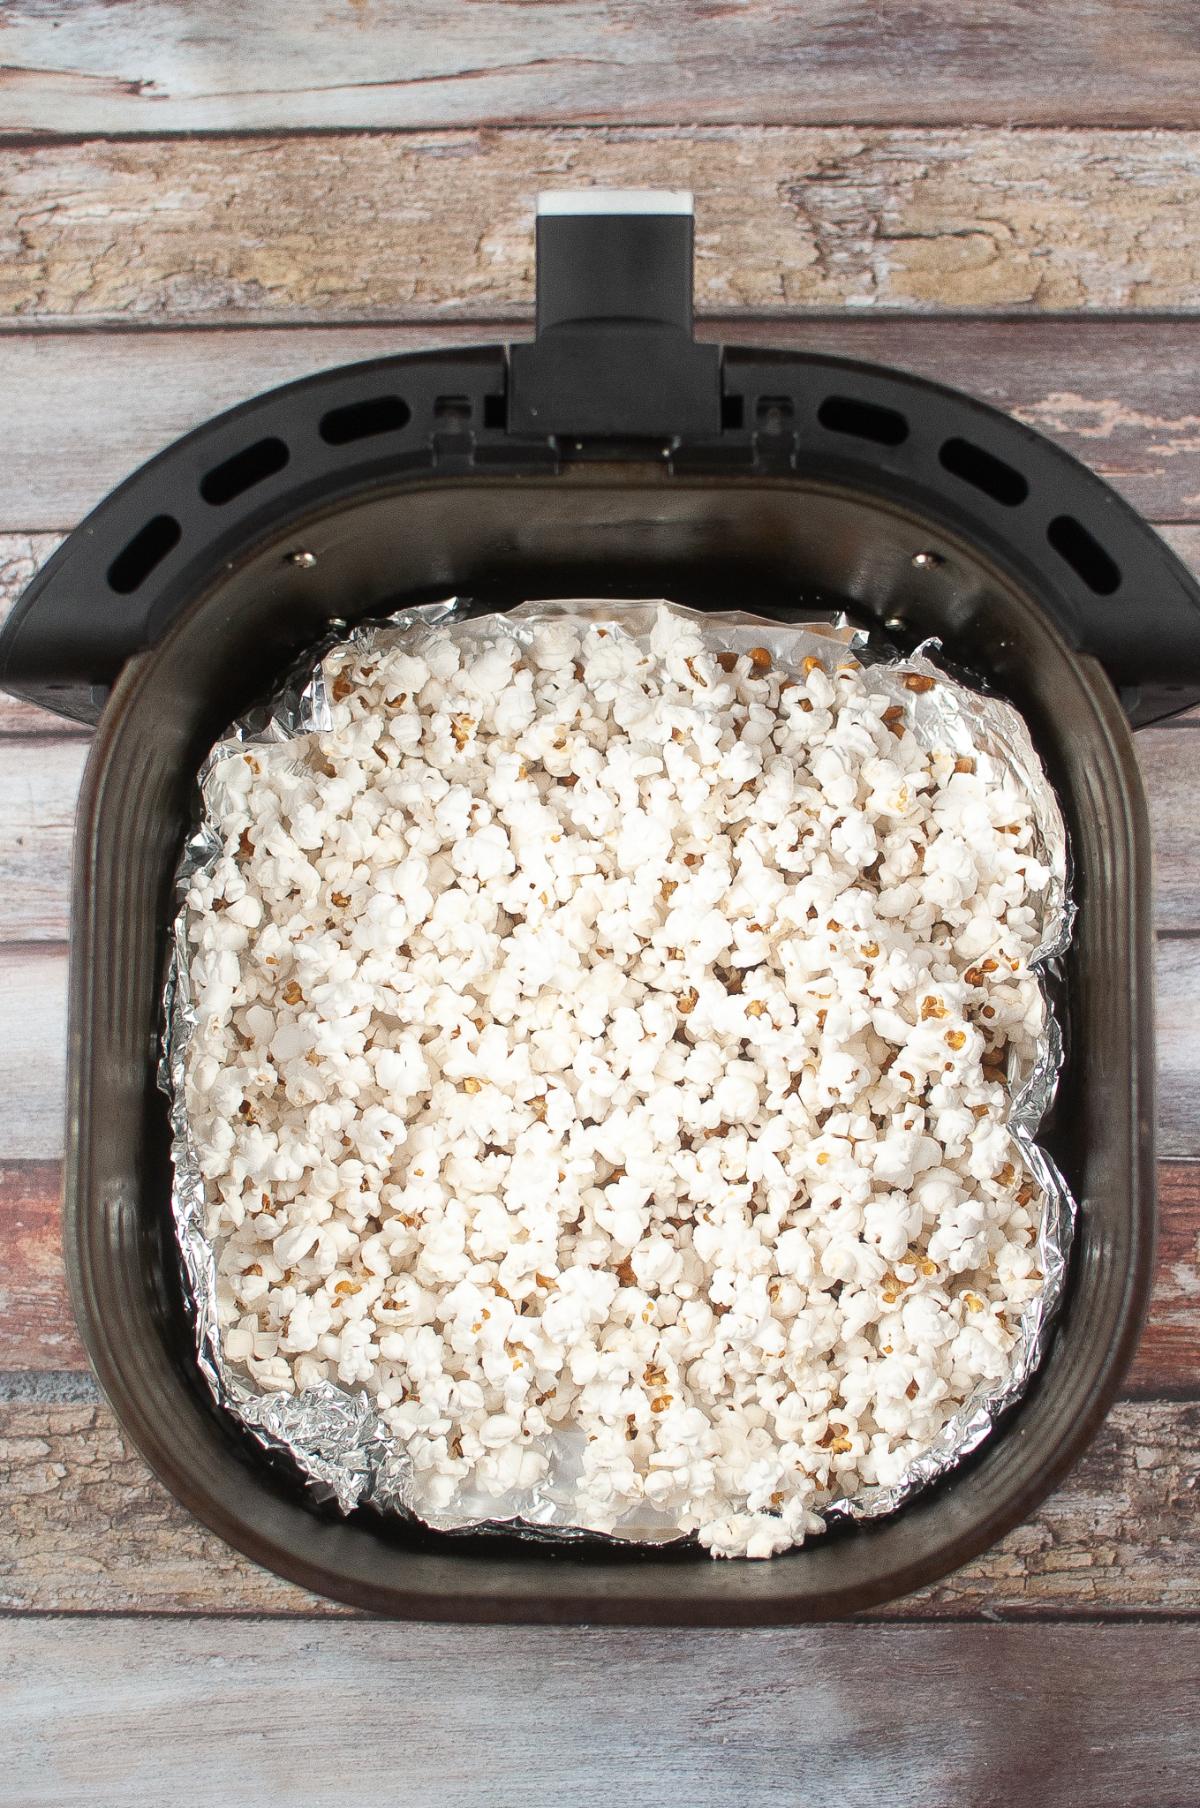 Air fryer popcorn filling a basket on a wooden surface.